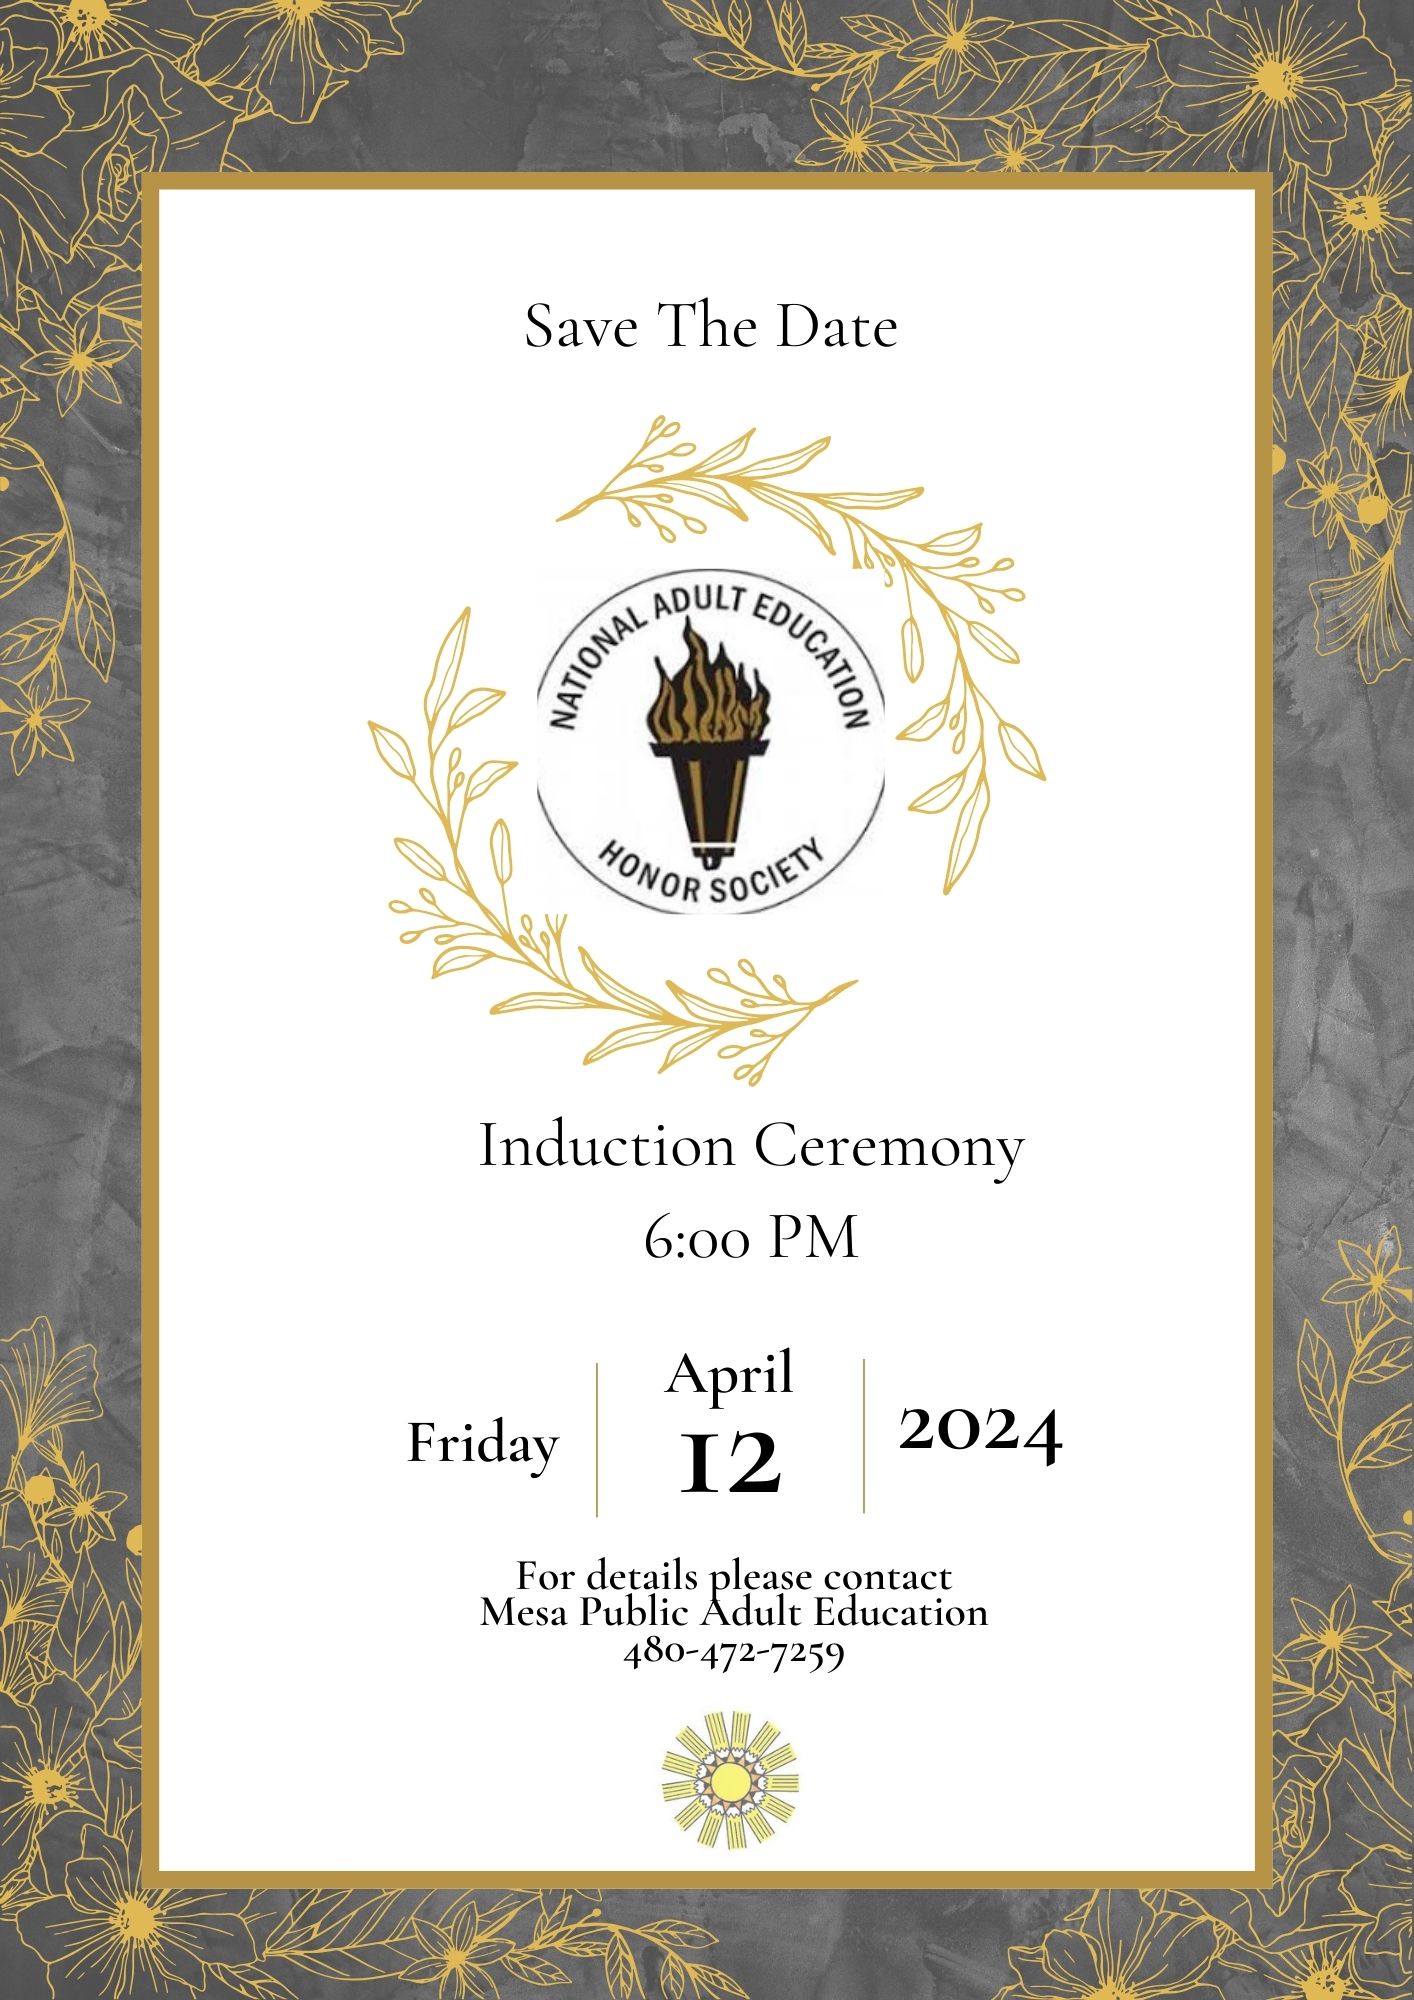 Honor Society Induction Ceremony: 6pm, April 12